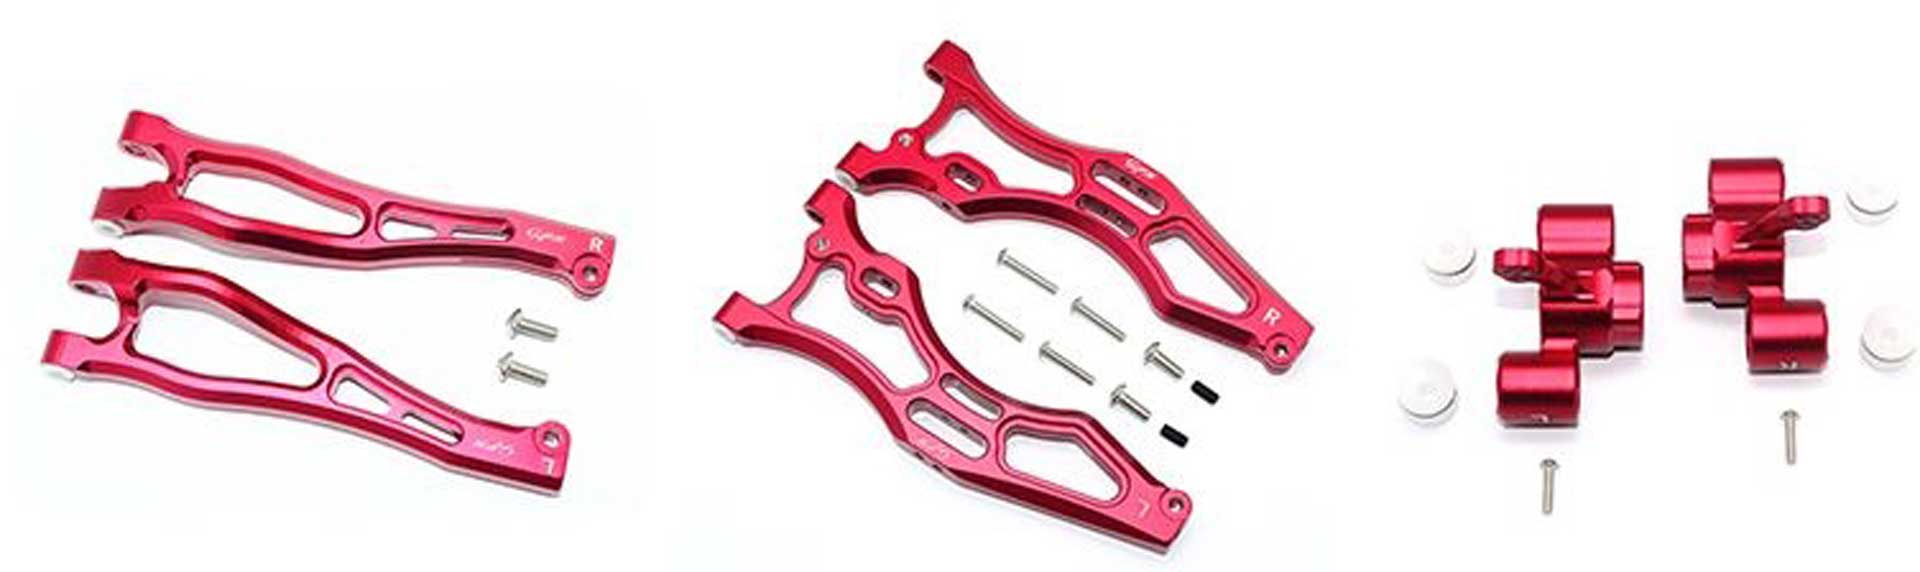 GPM ALUMINUM FRONT UPPER&LOWER ARMS+FRONT KNUCKLE ARMS - 22PC SET GPM ARRMA 1/8 KRATON OUTCAST NO